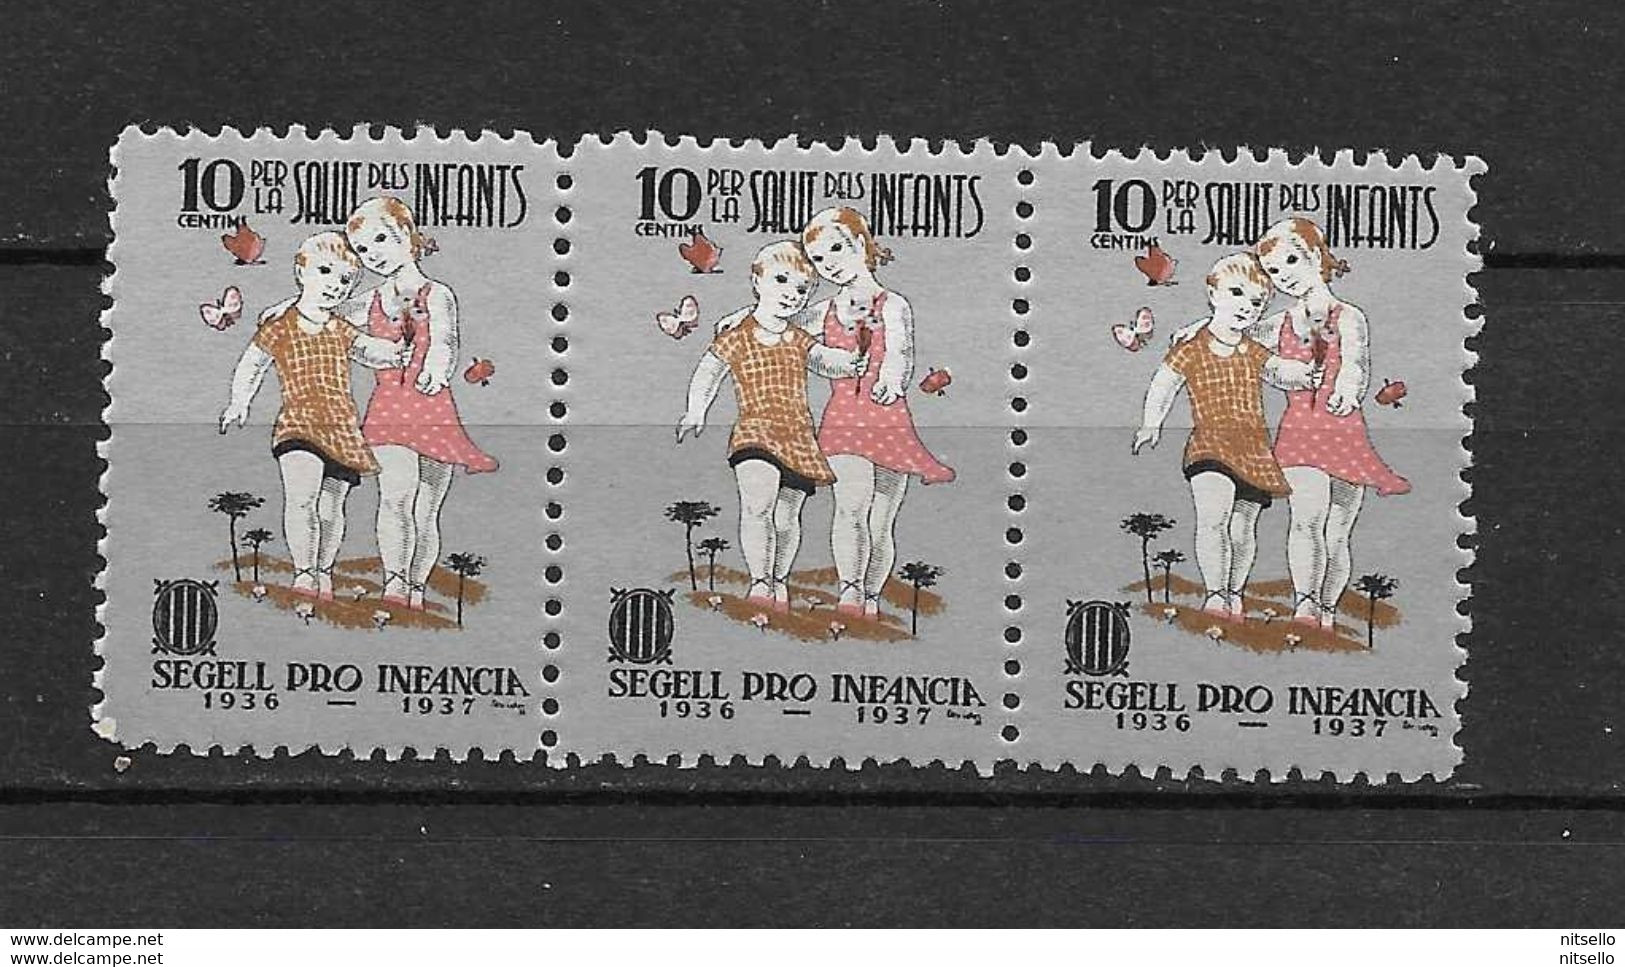 LOTE 2112B  ///  ( C245)  PROINFANCIA  1936 X 3  **MNH - Nationalist Issues